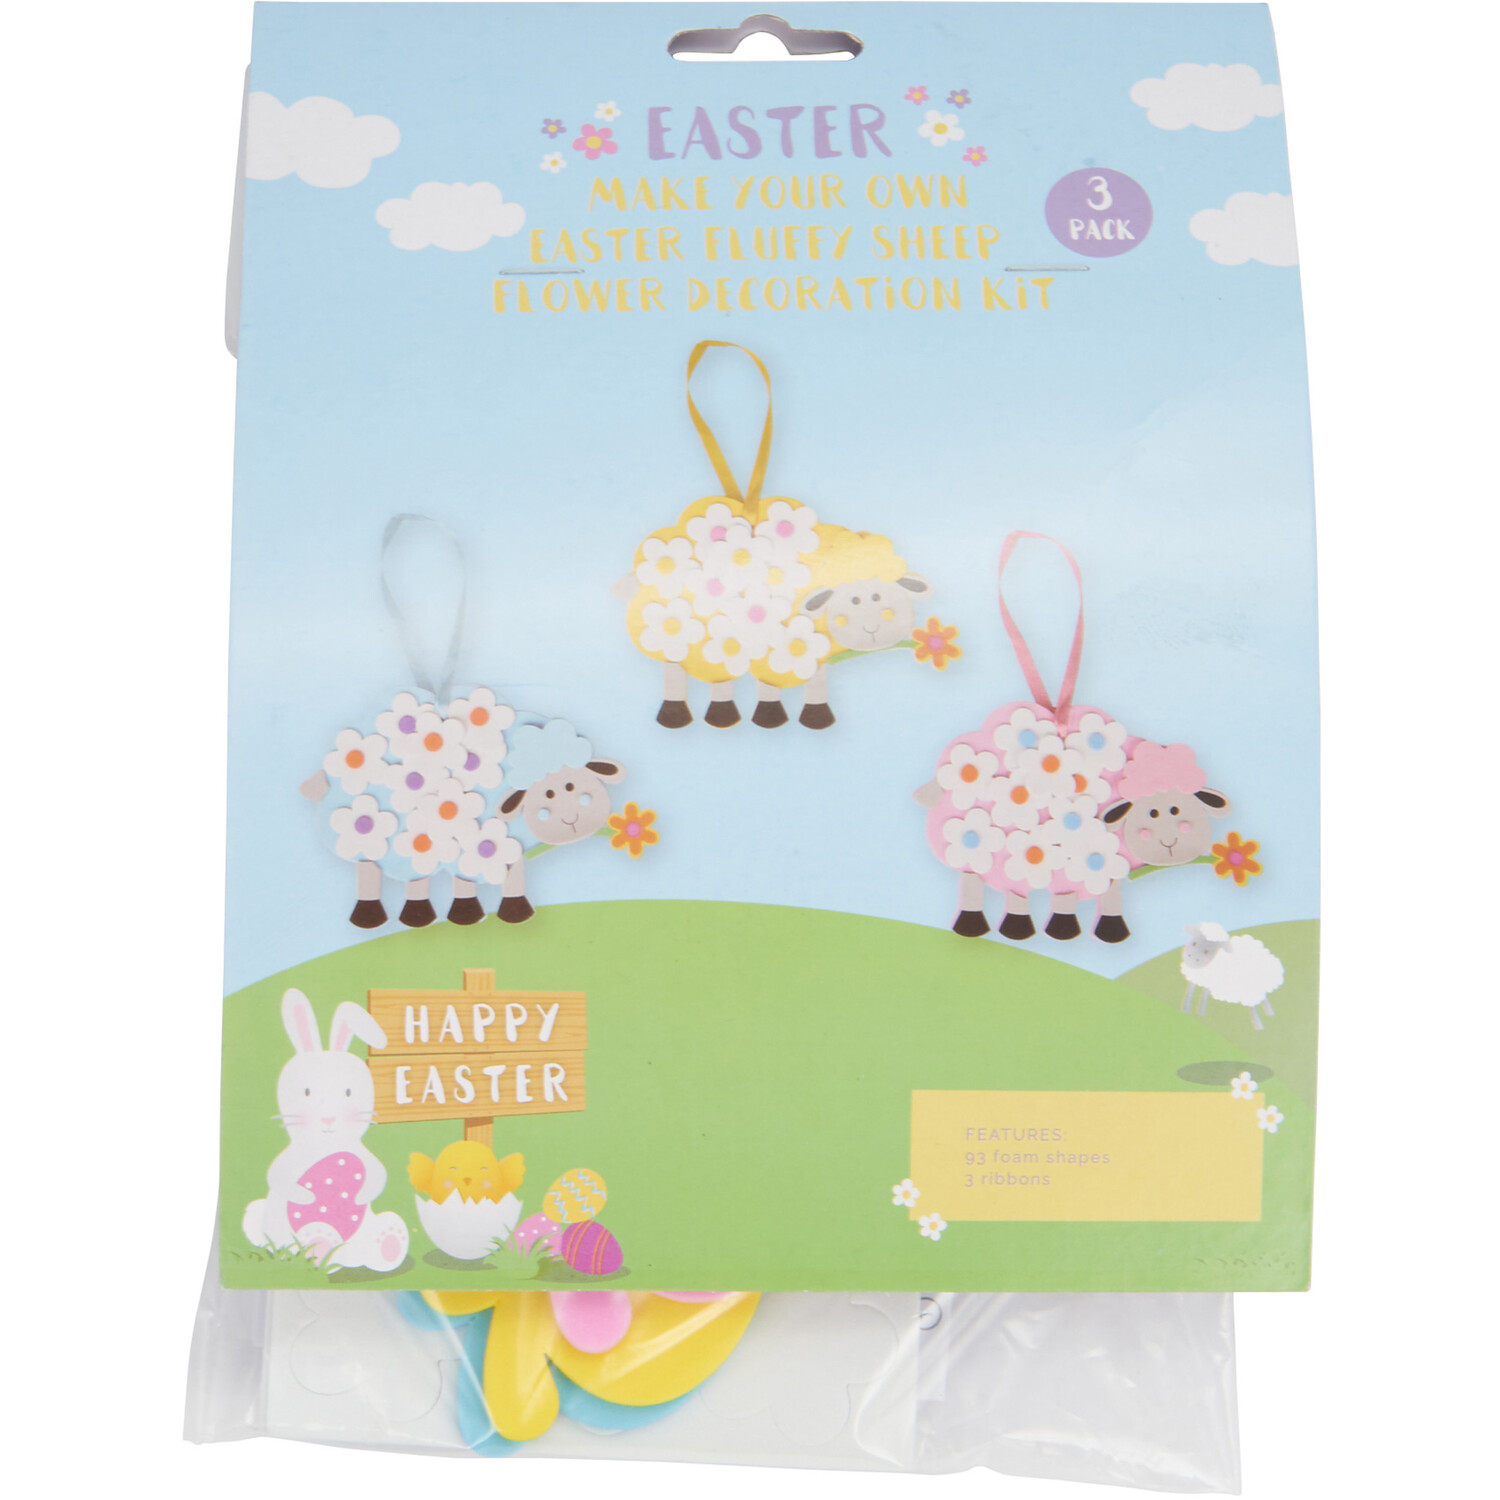 Easter Make Your Own Fluffy Sheep Flower Decoration Kit Image 1